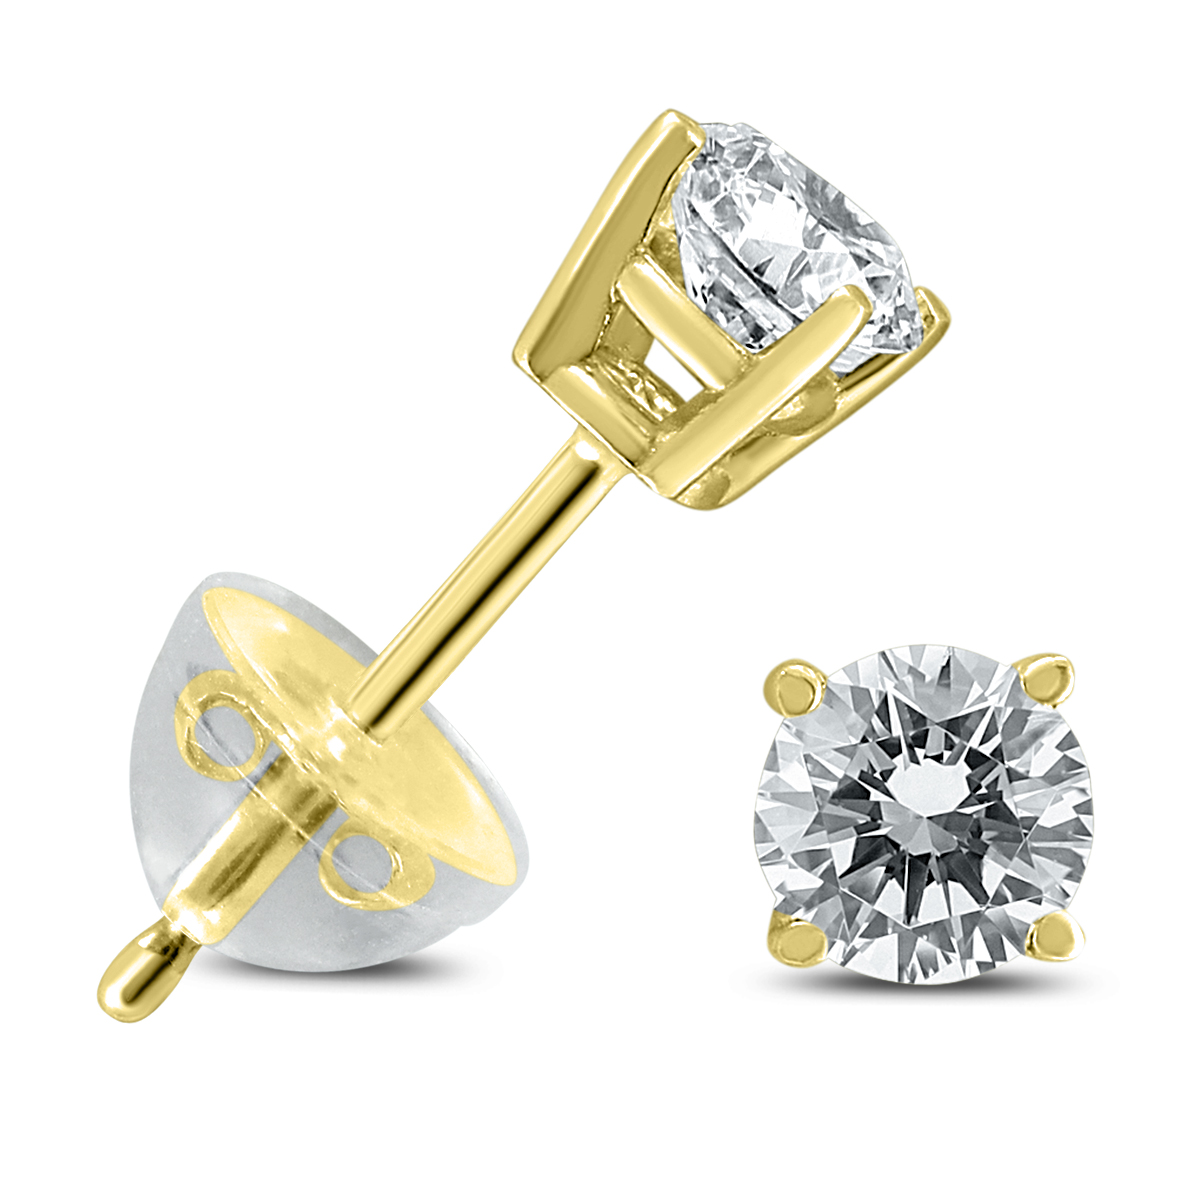 .18CTW Round Diamond Solitaire Stud Earrings In 14k Yellow Gold with Silicon Backs